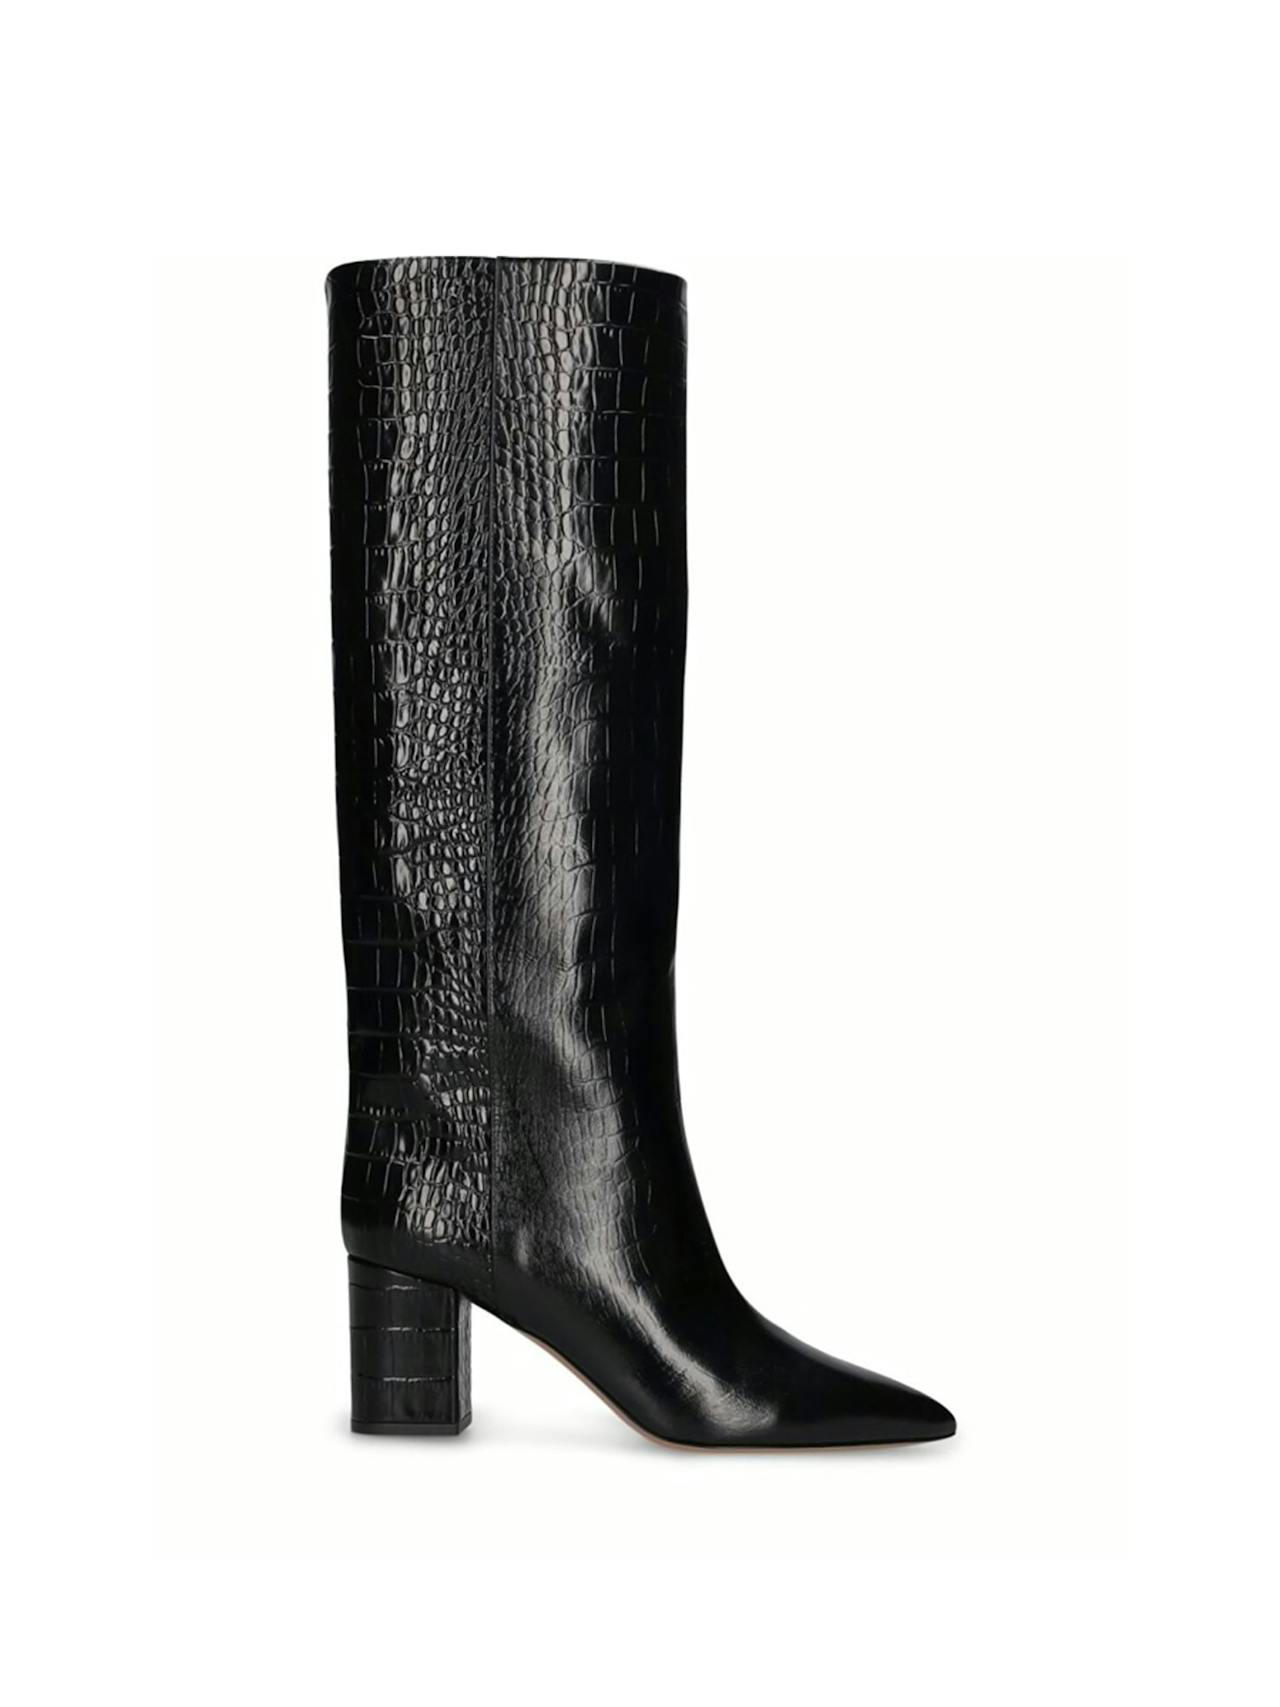 70mm Anja croc embossed tall boots